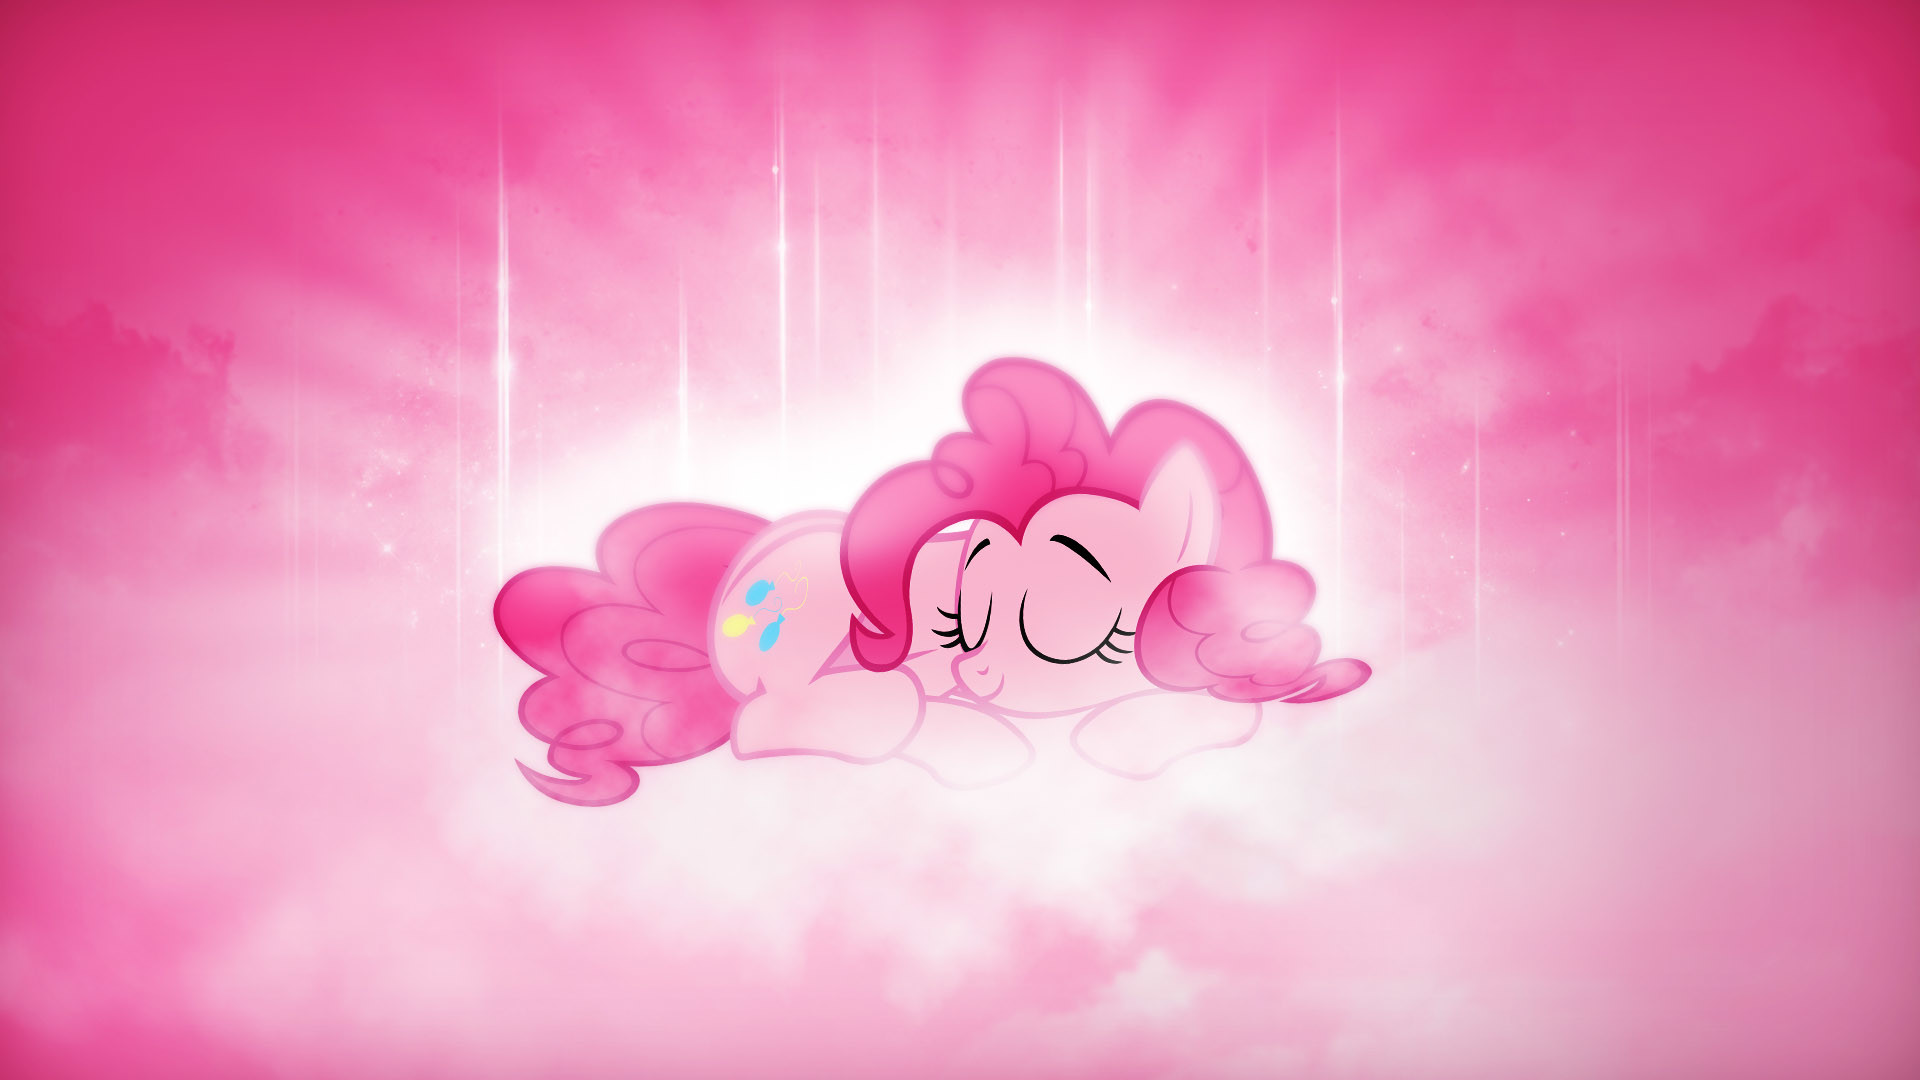 1920x1080 WOTW #3 : Pinkie Pie - Sweet cotton candy dreams by romus91 on .